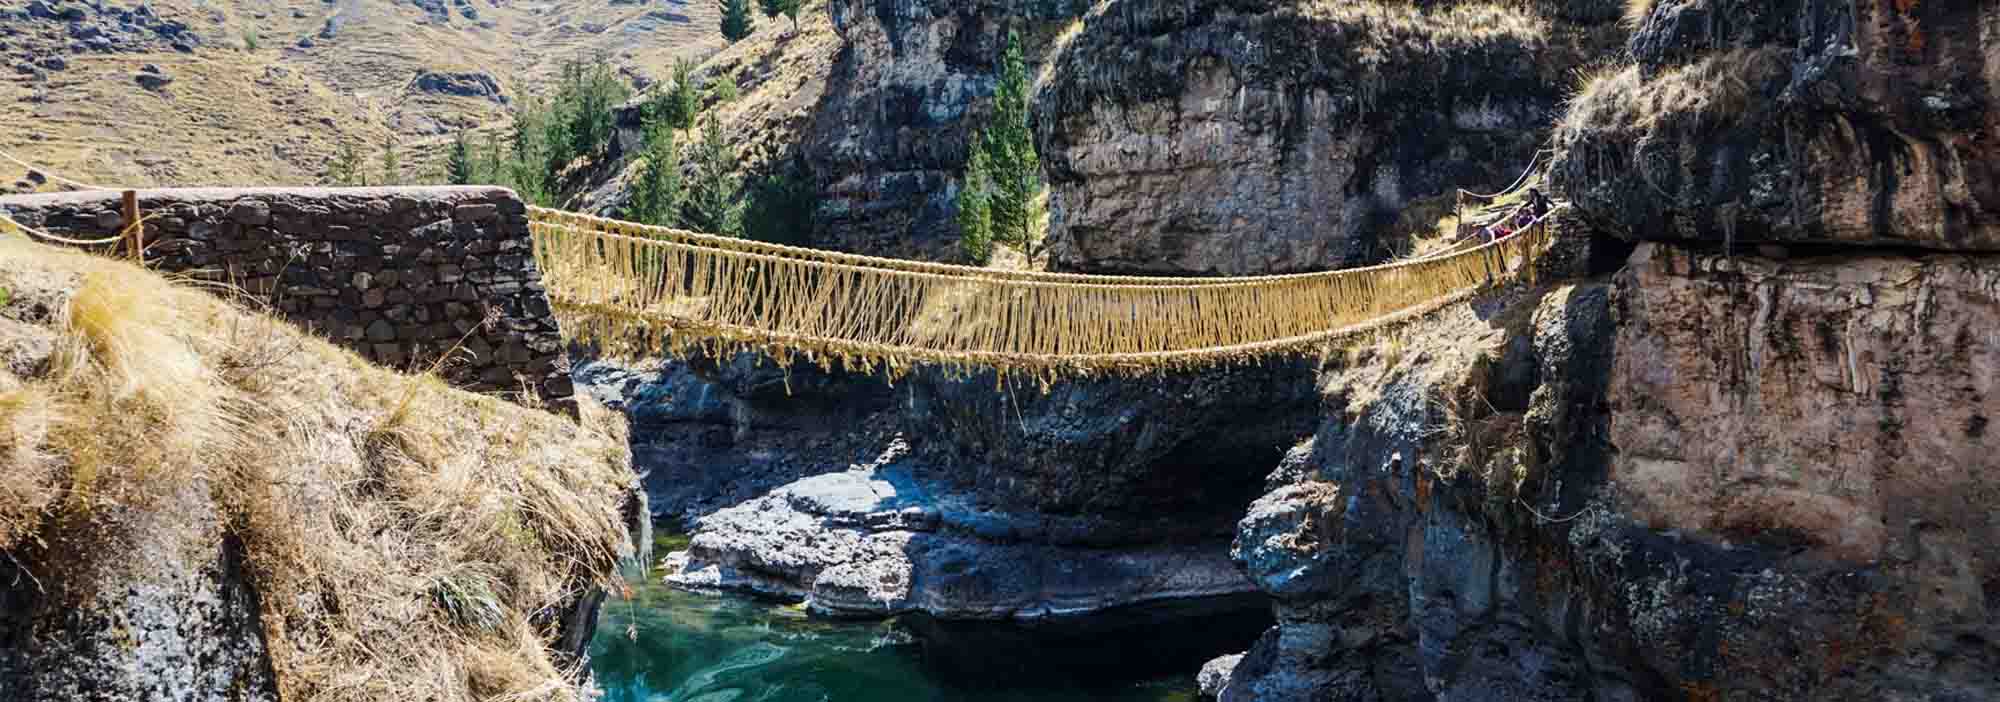 Peru's Incan Rope Bridges On The Thread of Dissapearing